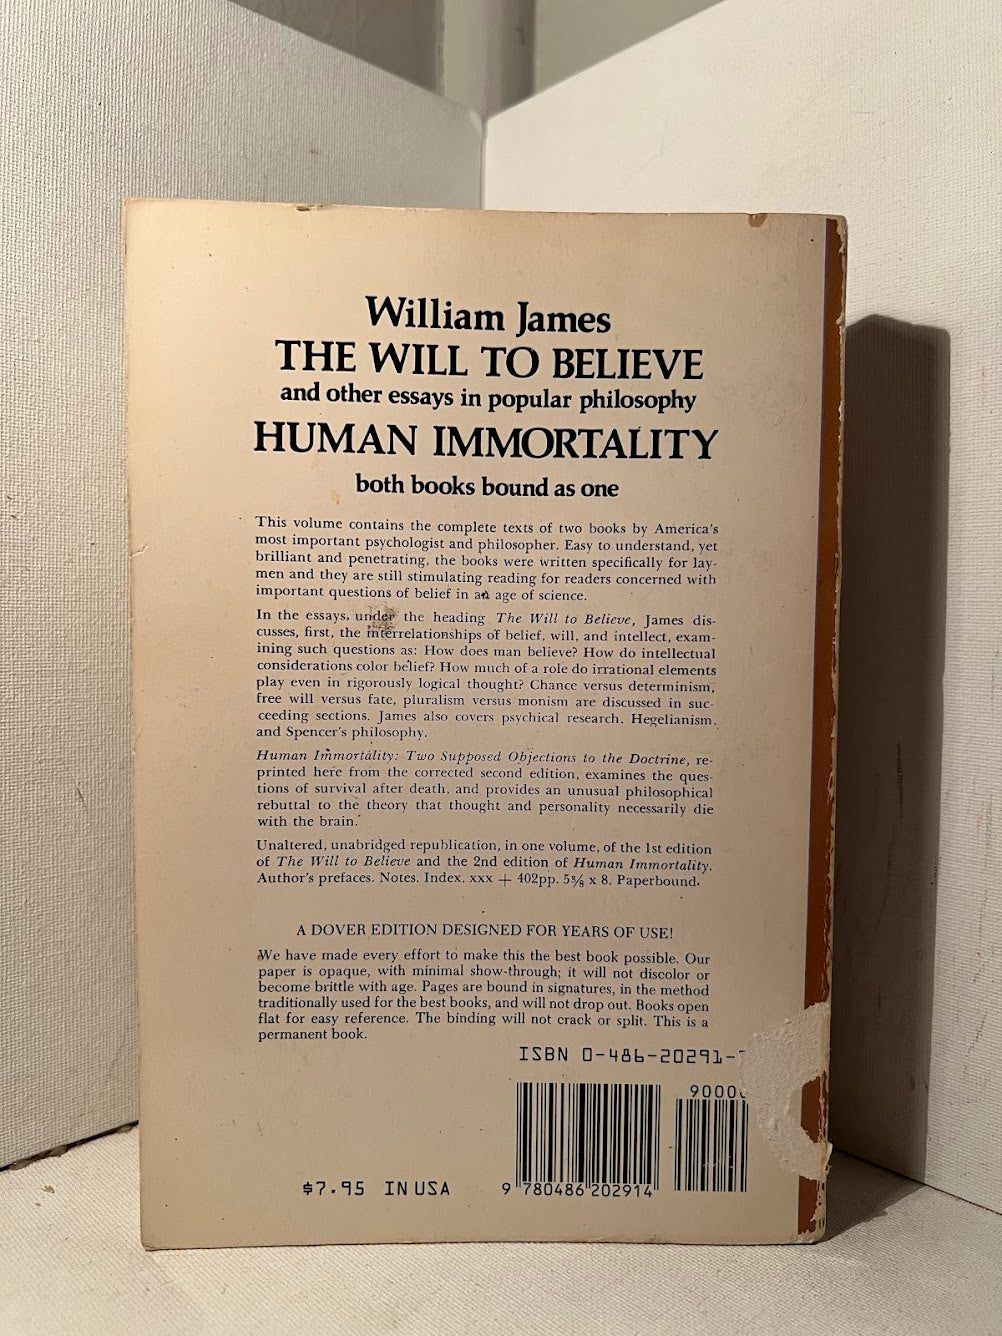 The Will to Believe and Other Essays by William James